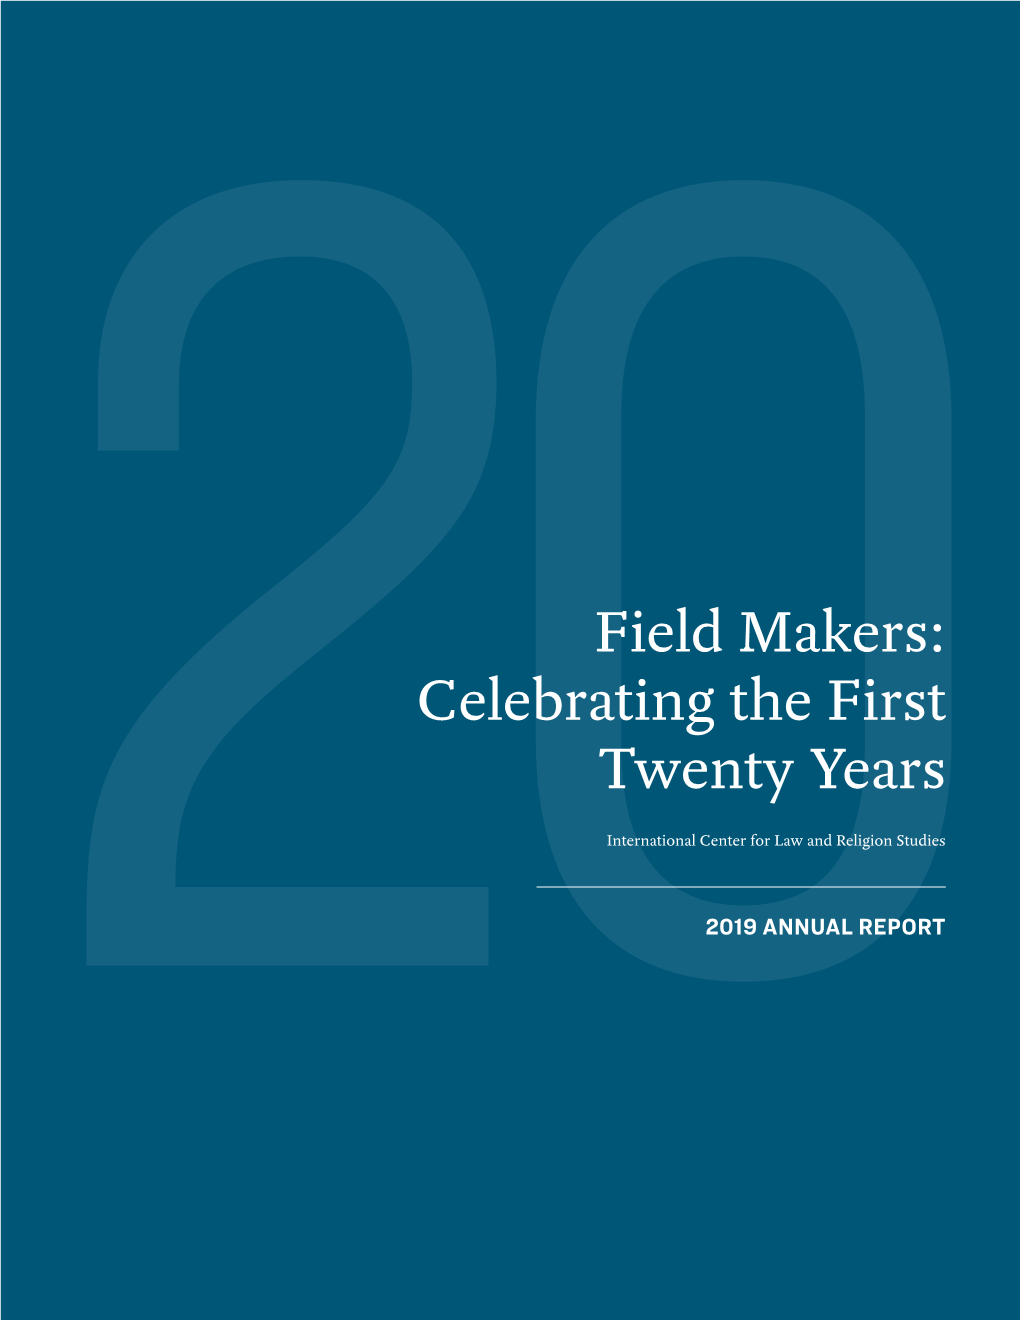 Field Makers: Celebrating the First Twenty Years